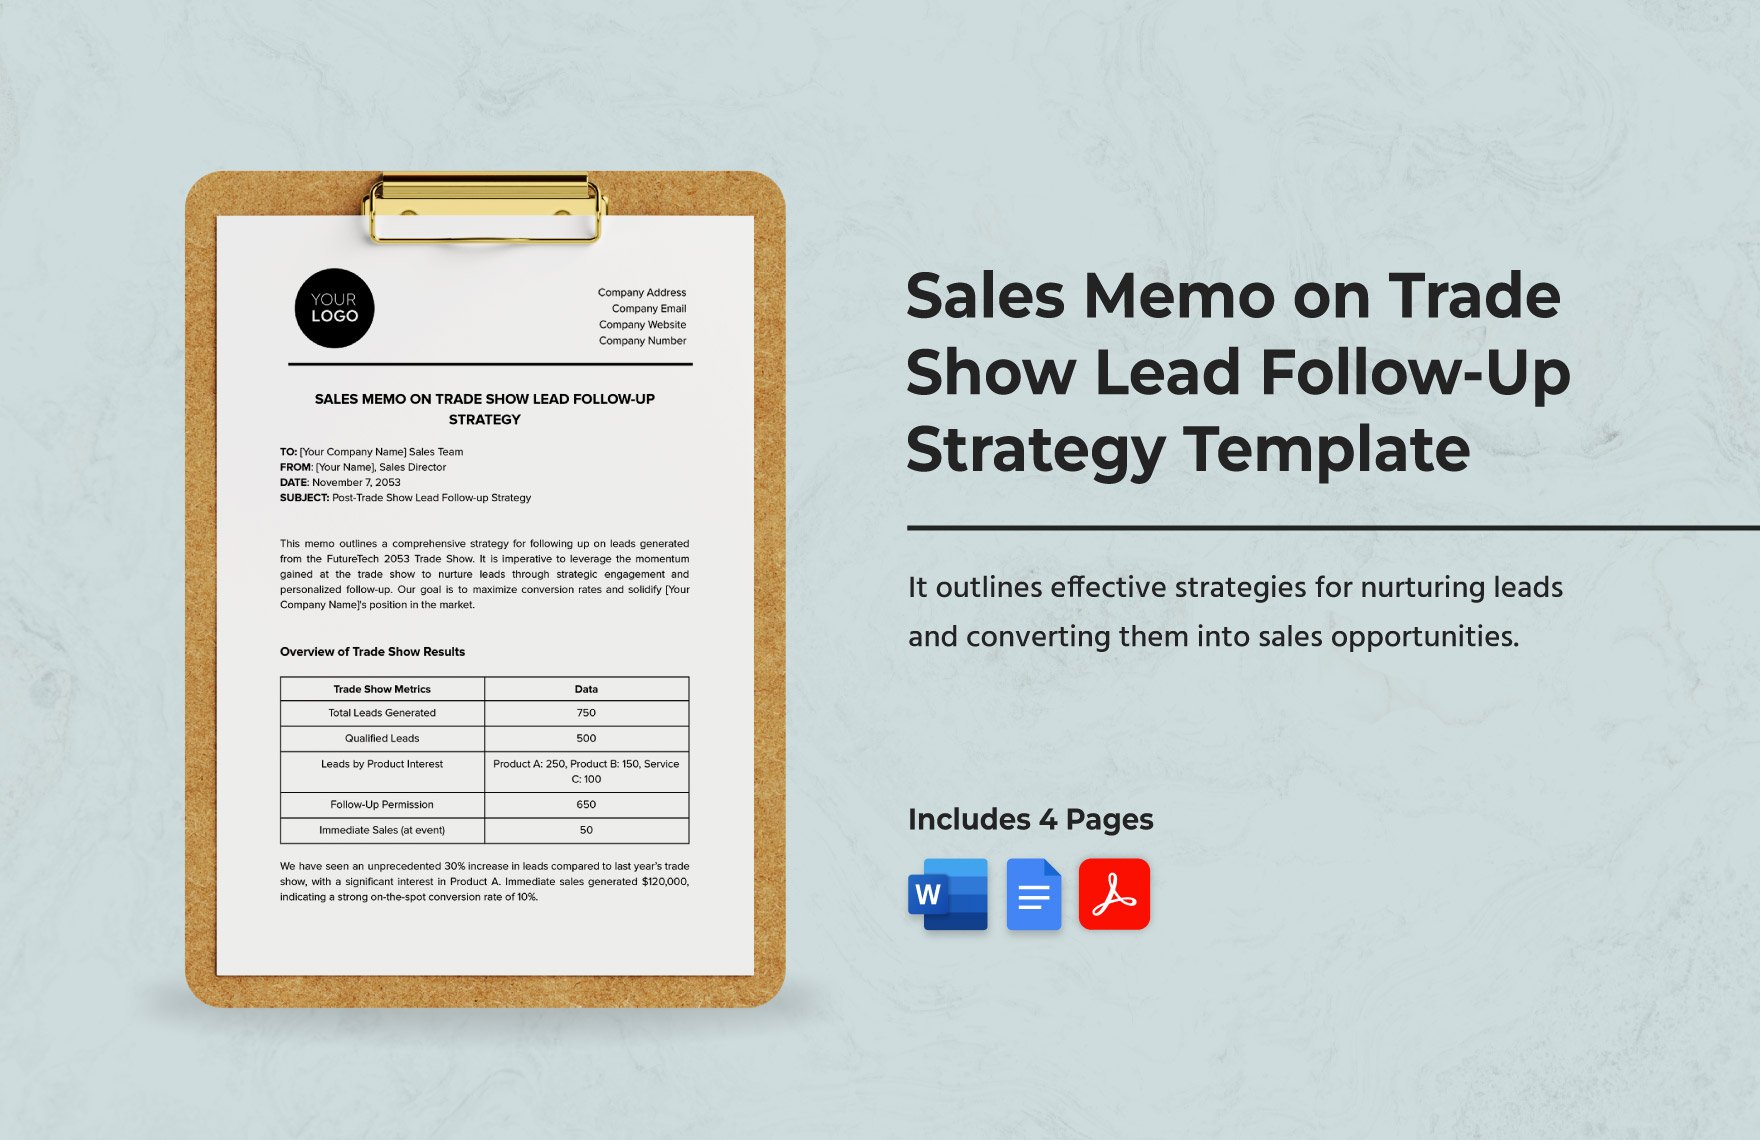 Sales Memo on Trade Show Lead Follow-Up Strategy Template